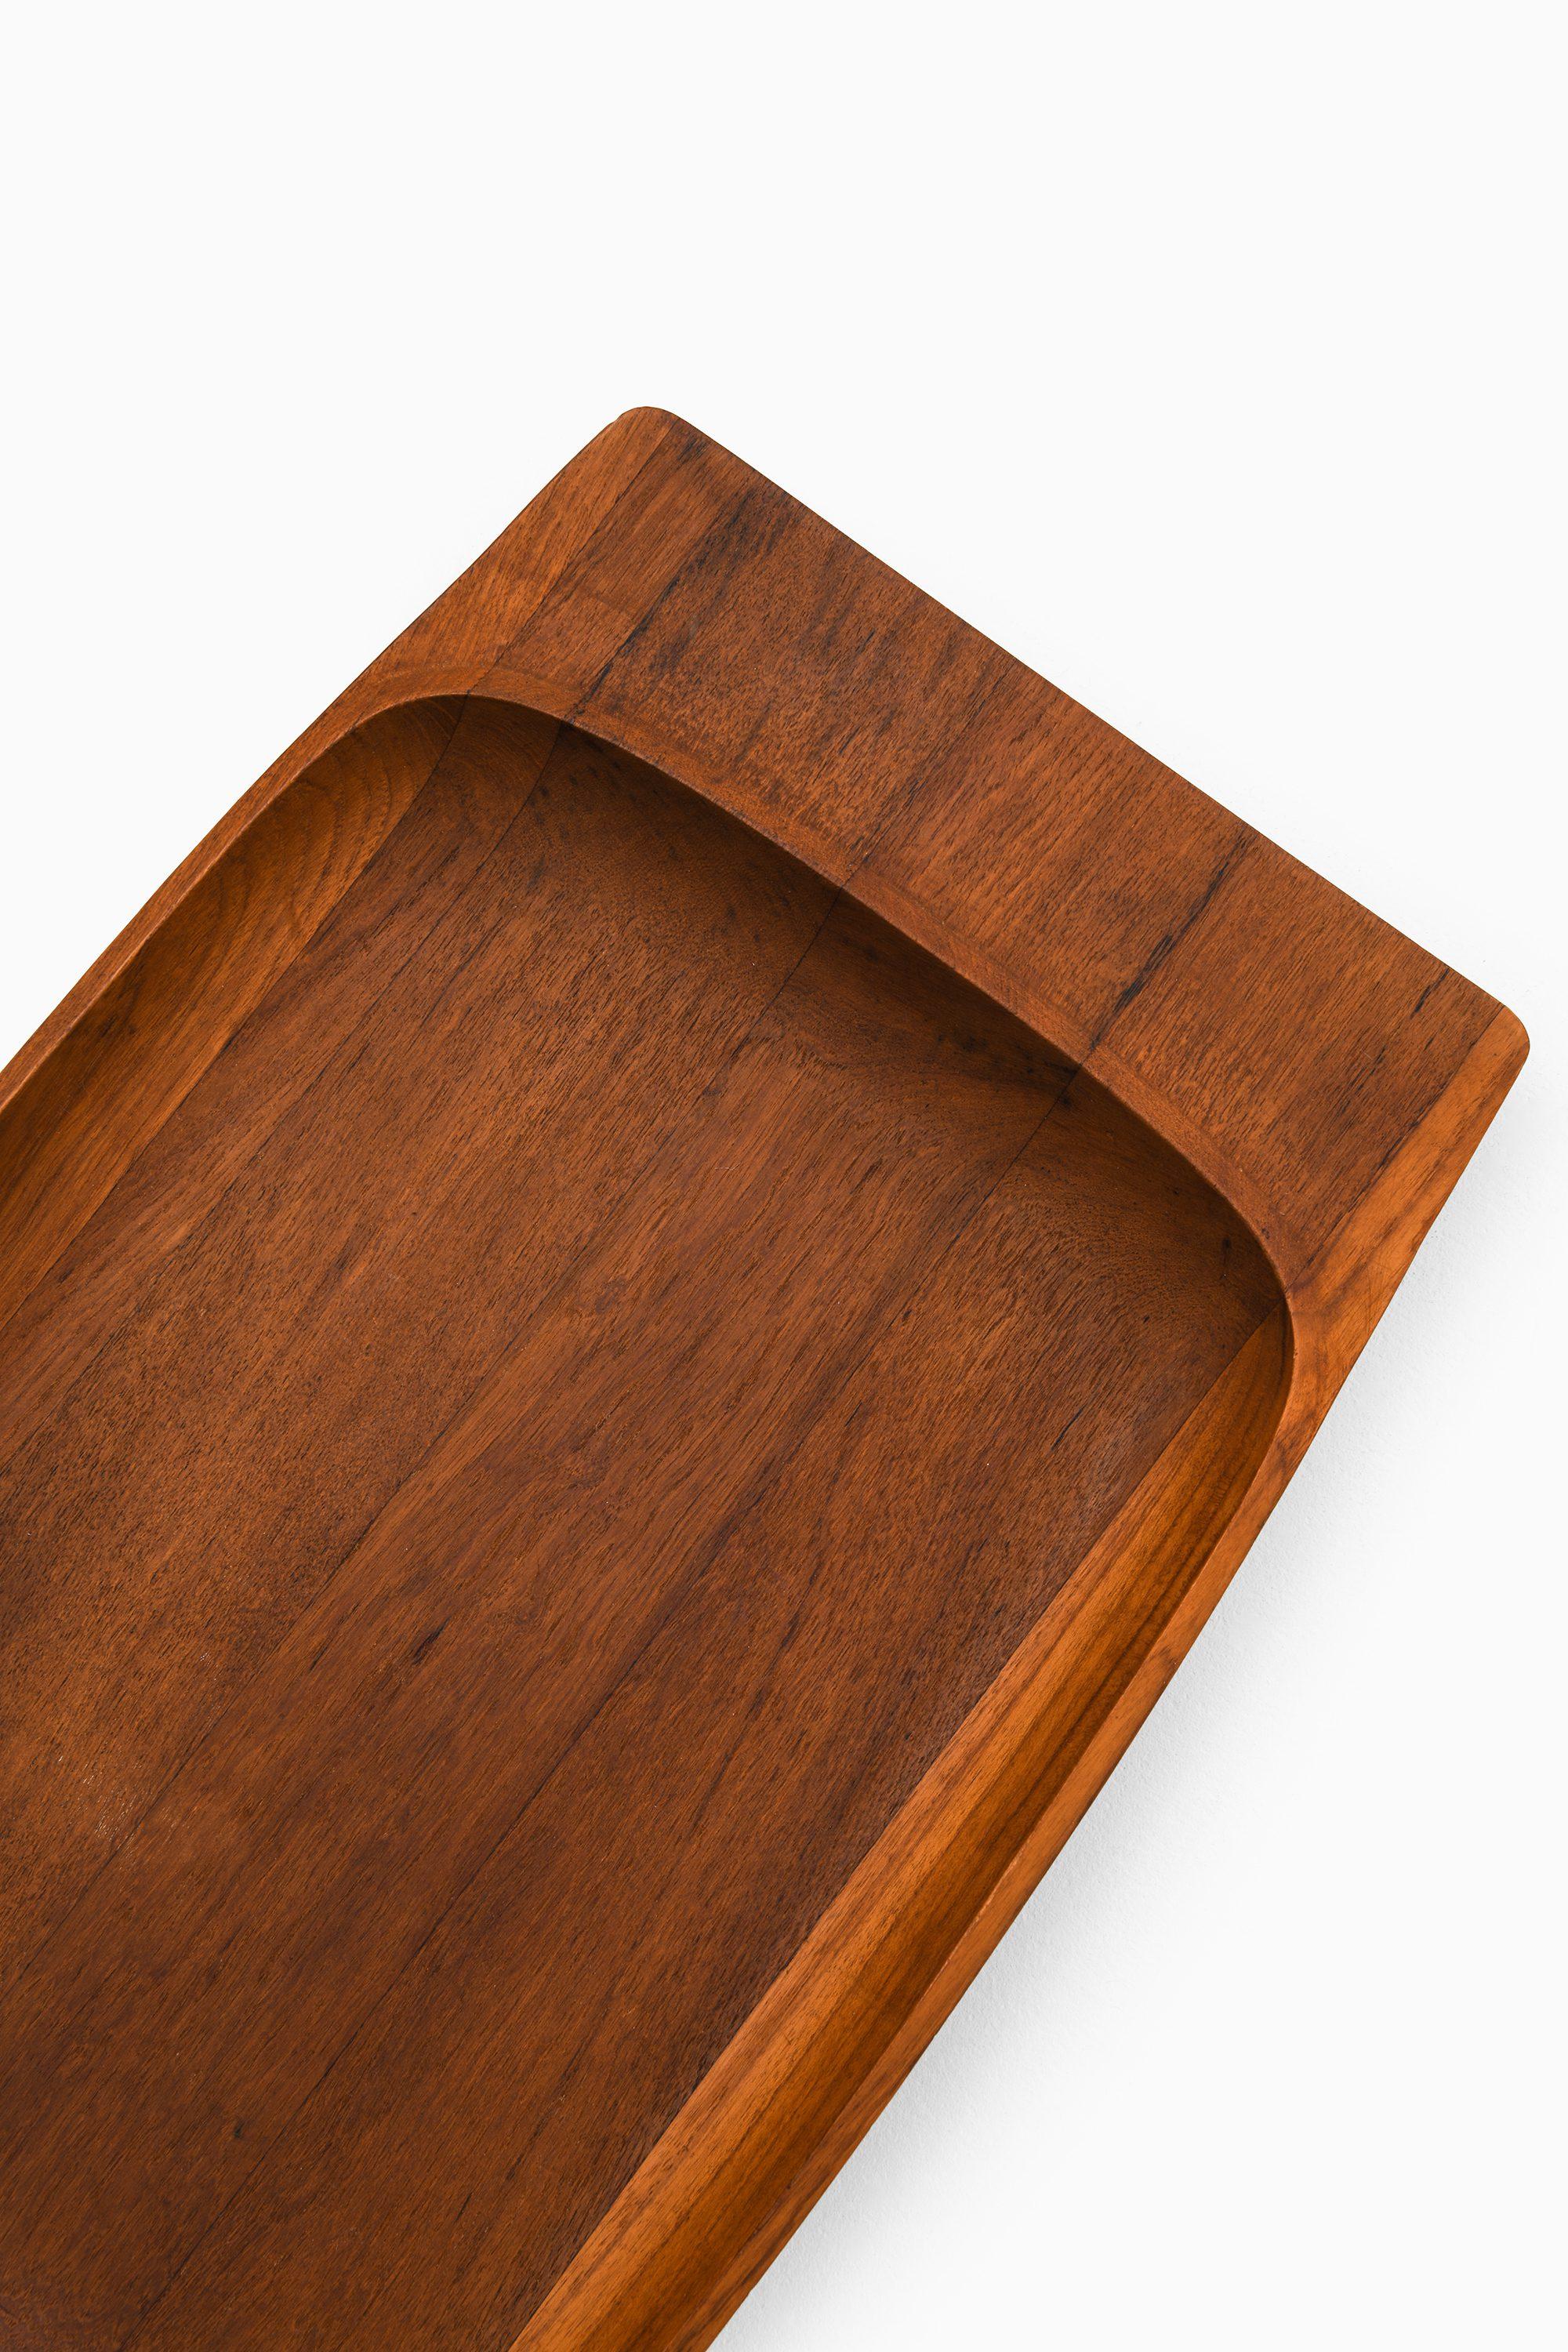 Serving Tray in Teak by Jens Quistgaard, 1950's In Good Condition For Sale In Limhamn, Skåne län